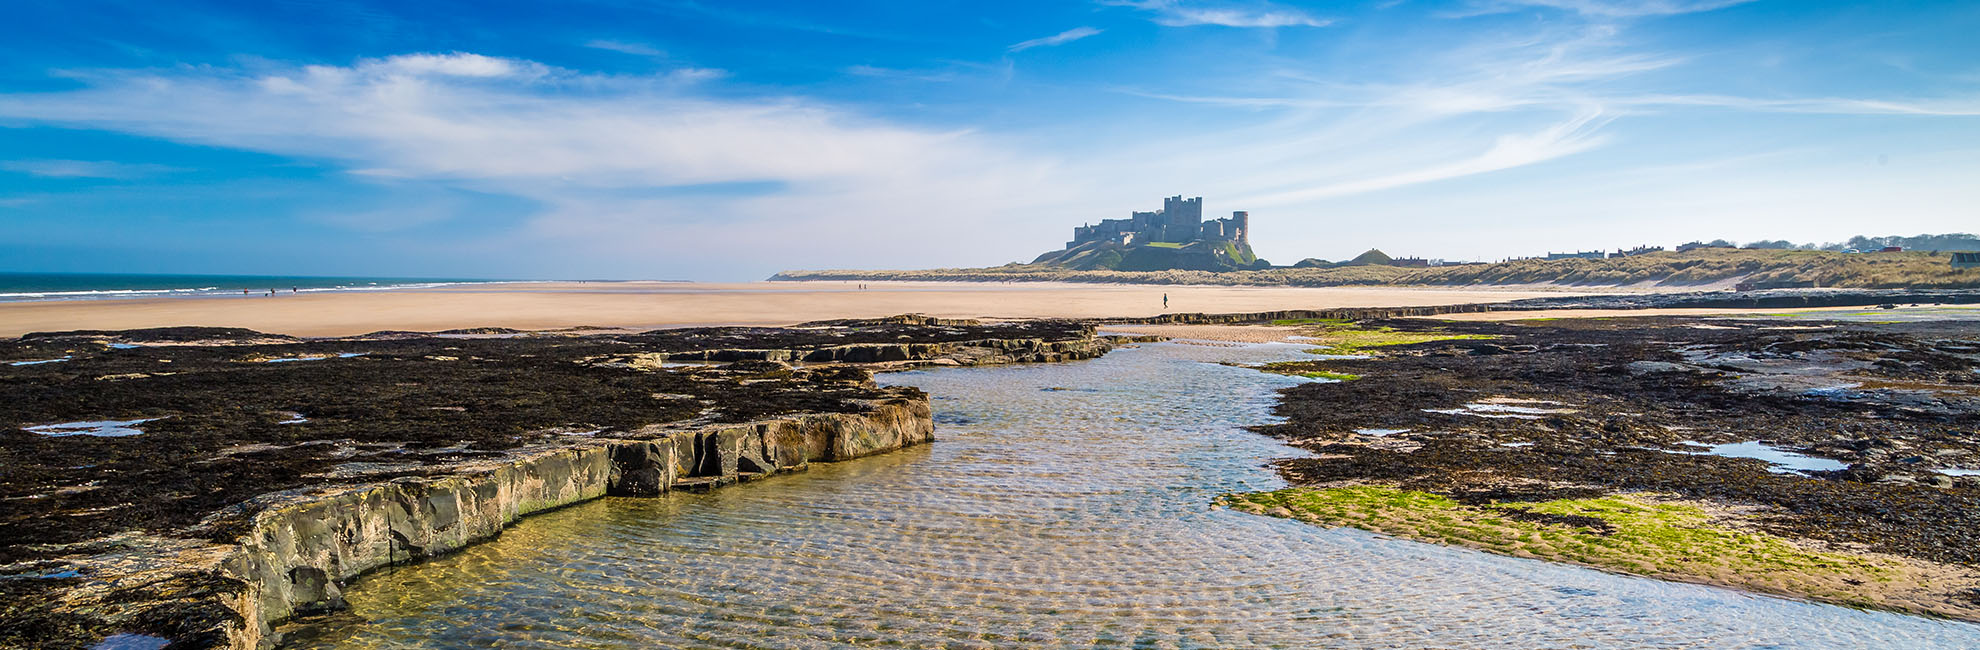 A view of Bamburgh Beach in Northumberland with Bamburgh Castle in the distance